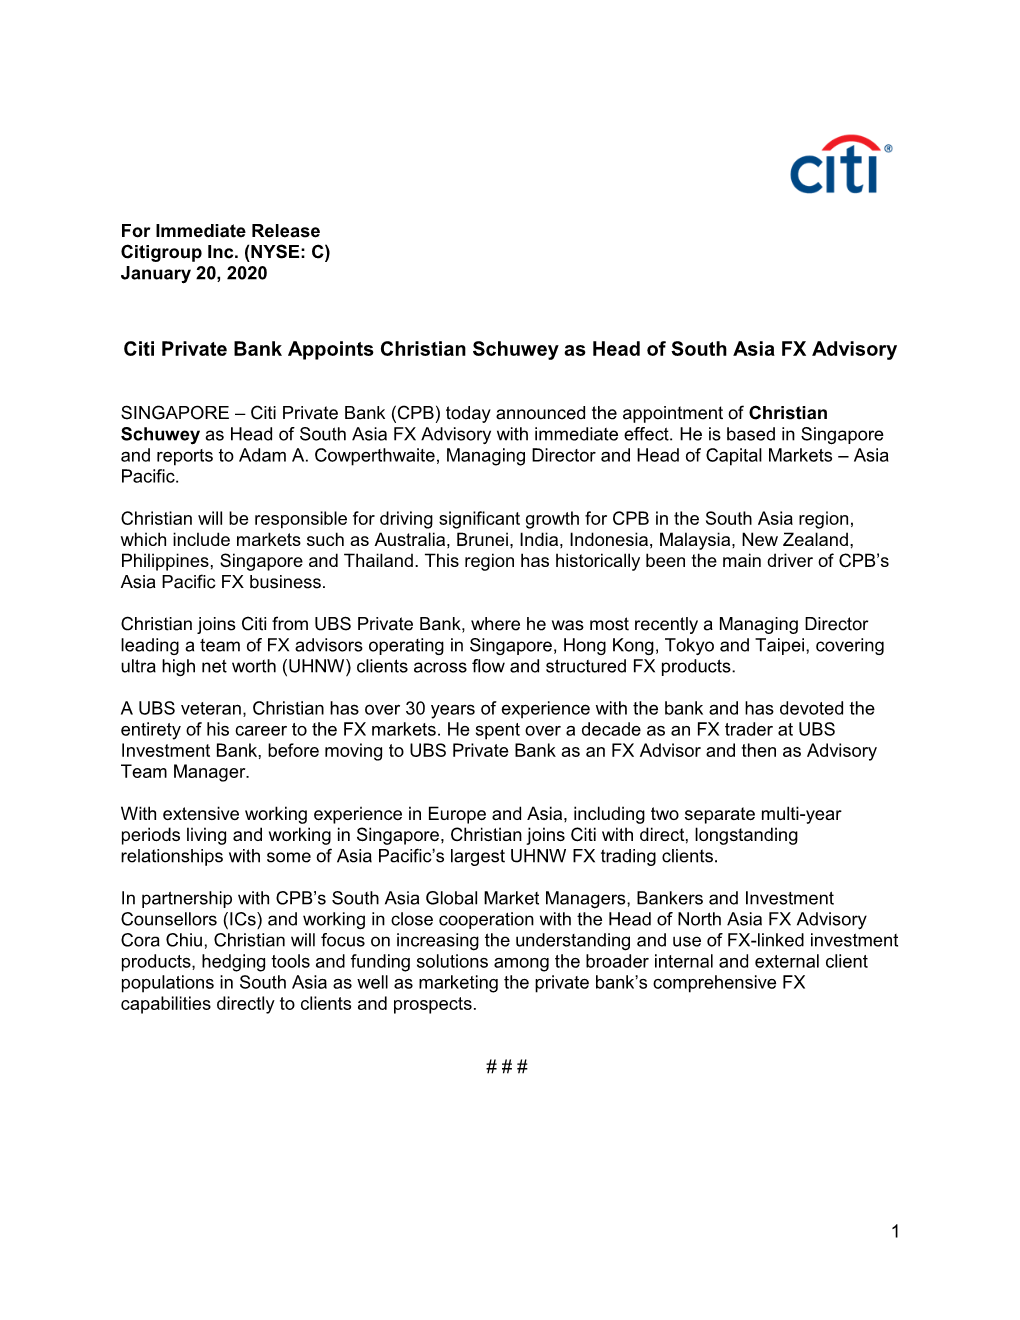 Citi Private Bank Appoints Christian Schuwey As Head of South Asia FX Advisory